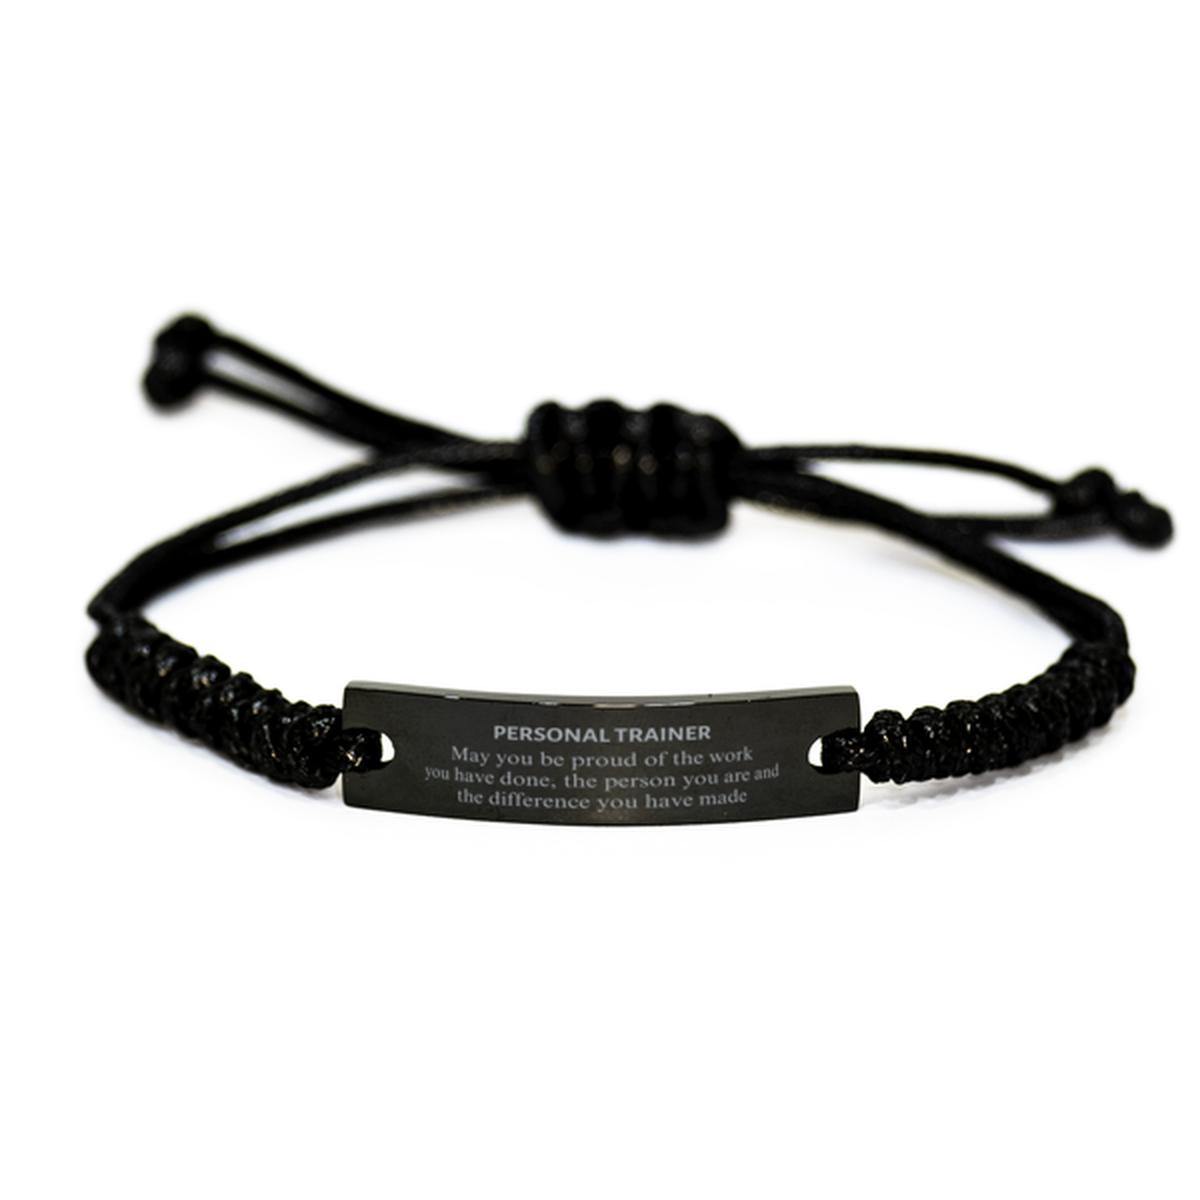 Personal Trainer May you be proud of the work you have done, Retirement Personal Trainer Black Rope Bracelet for Colleague Appreciation Gifts Amazing for Personal Trainer